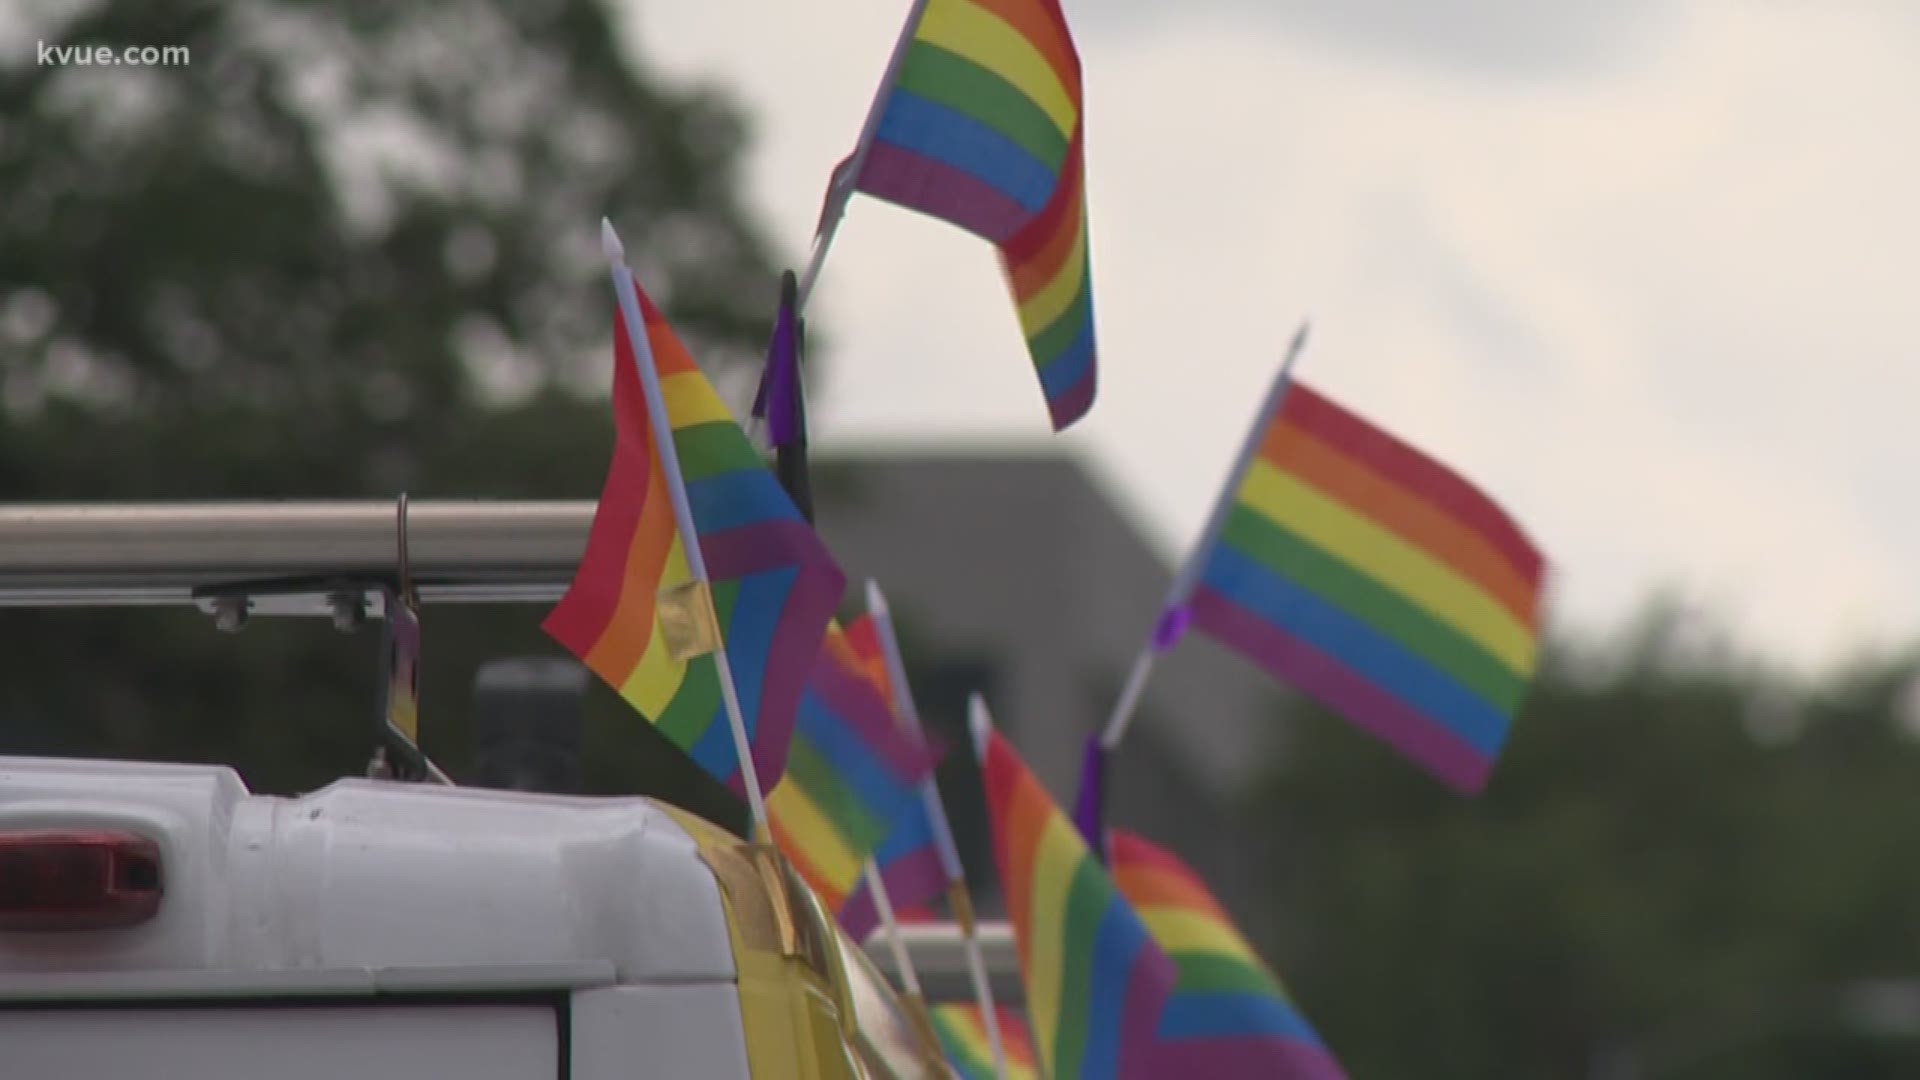 A rainy afternoon didn't stop people from showing up for the pride parade downtown tonight.